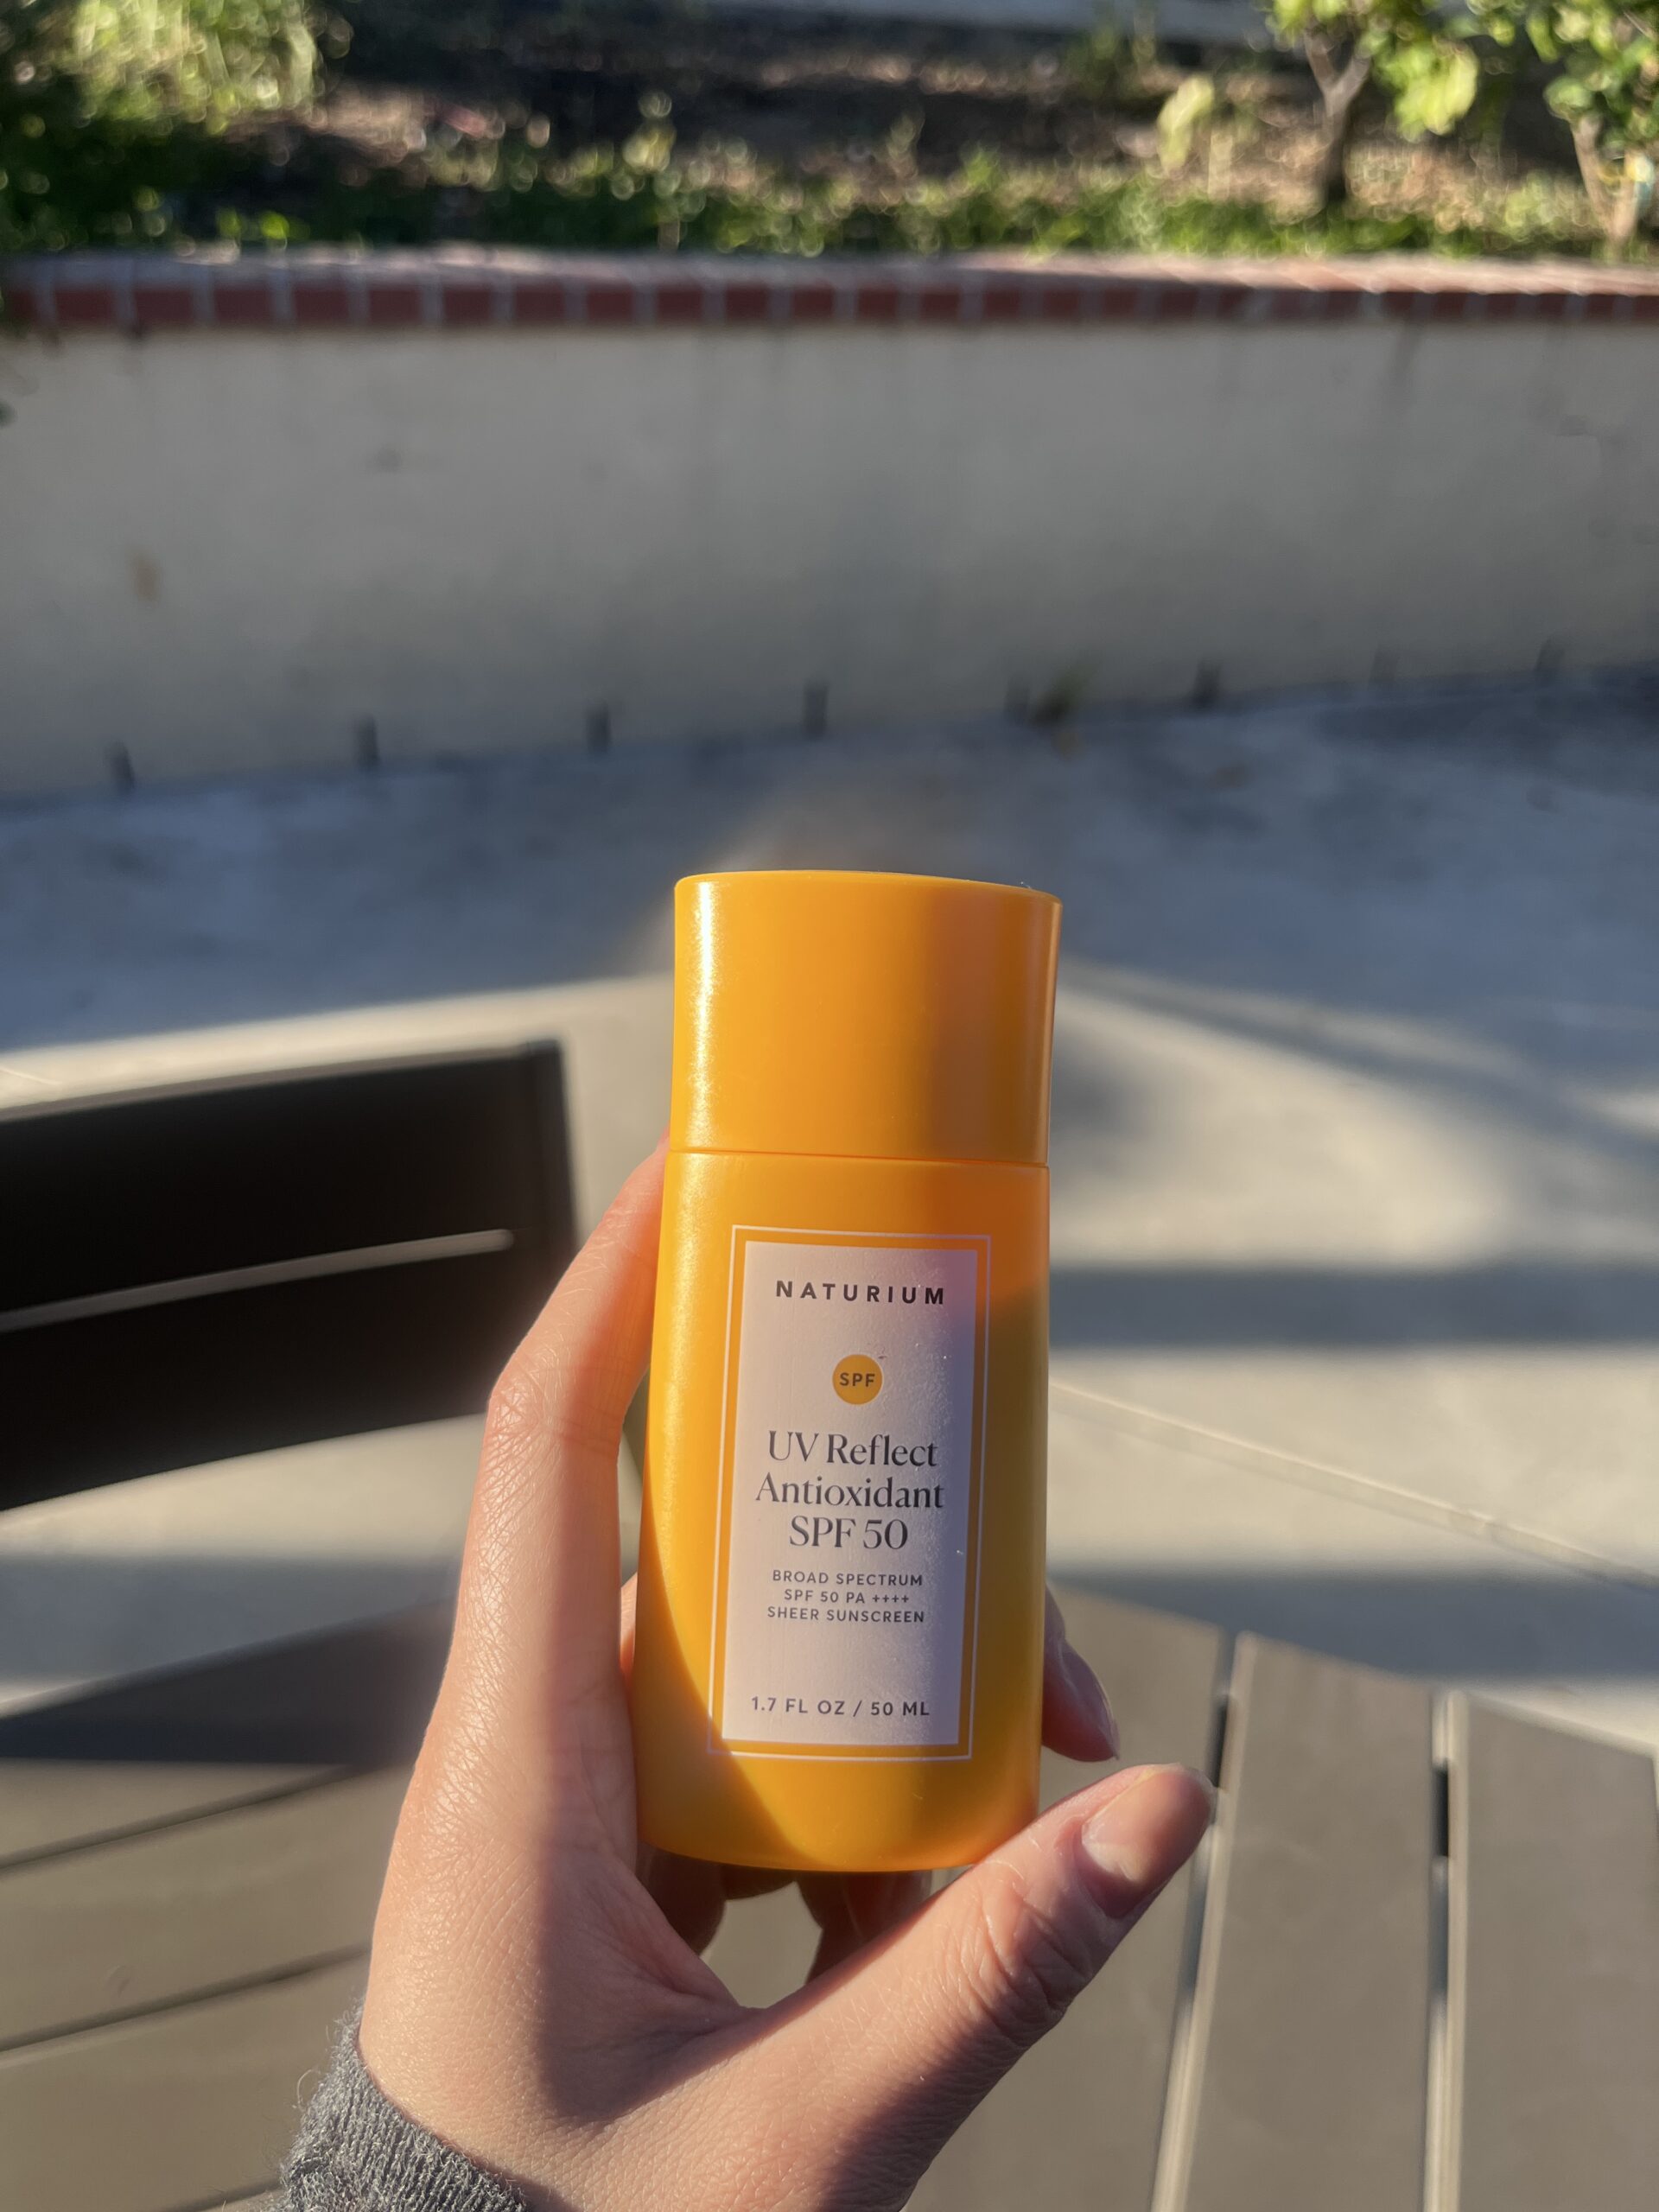 My Honest Review of the Naturium Sunscreen Review